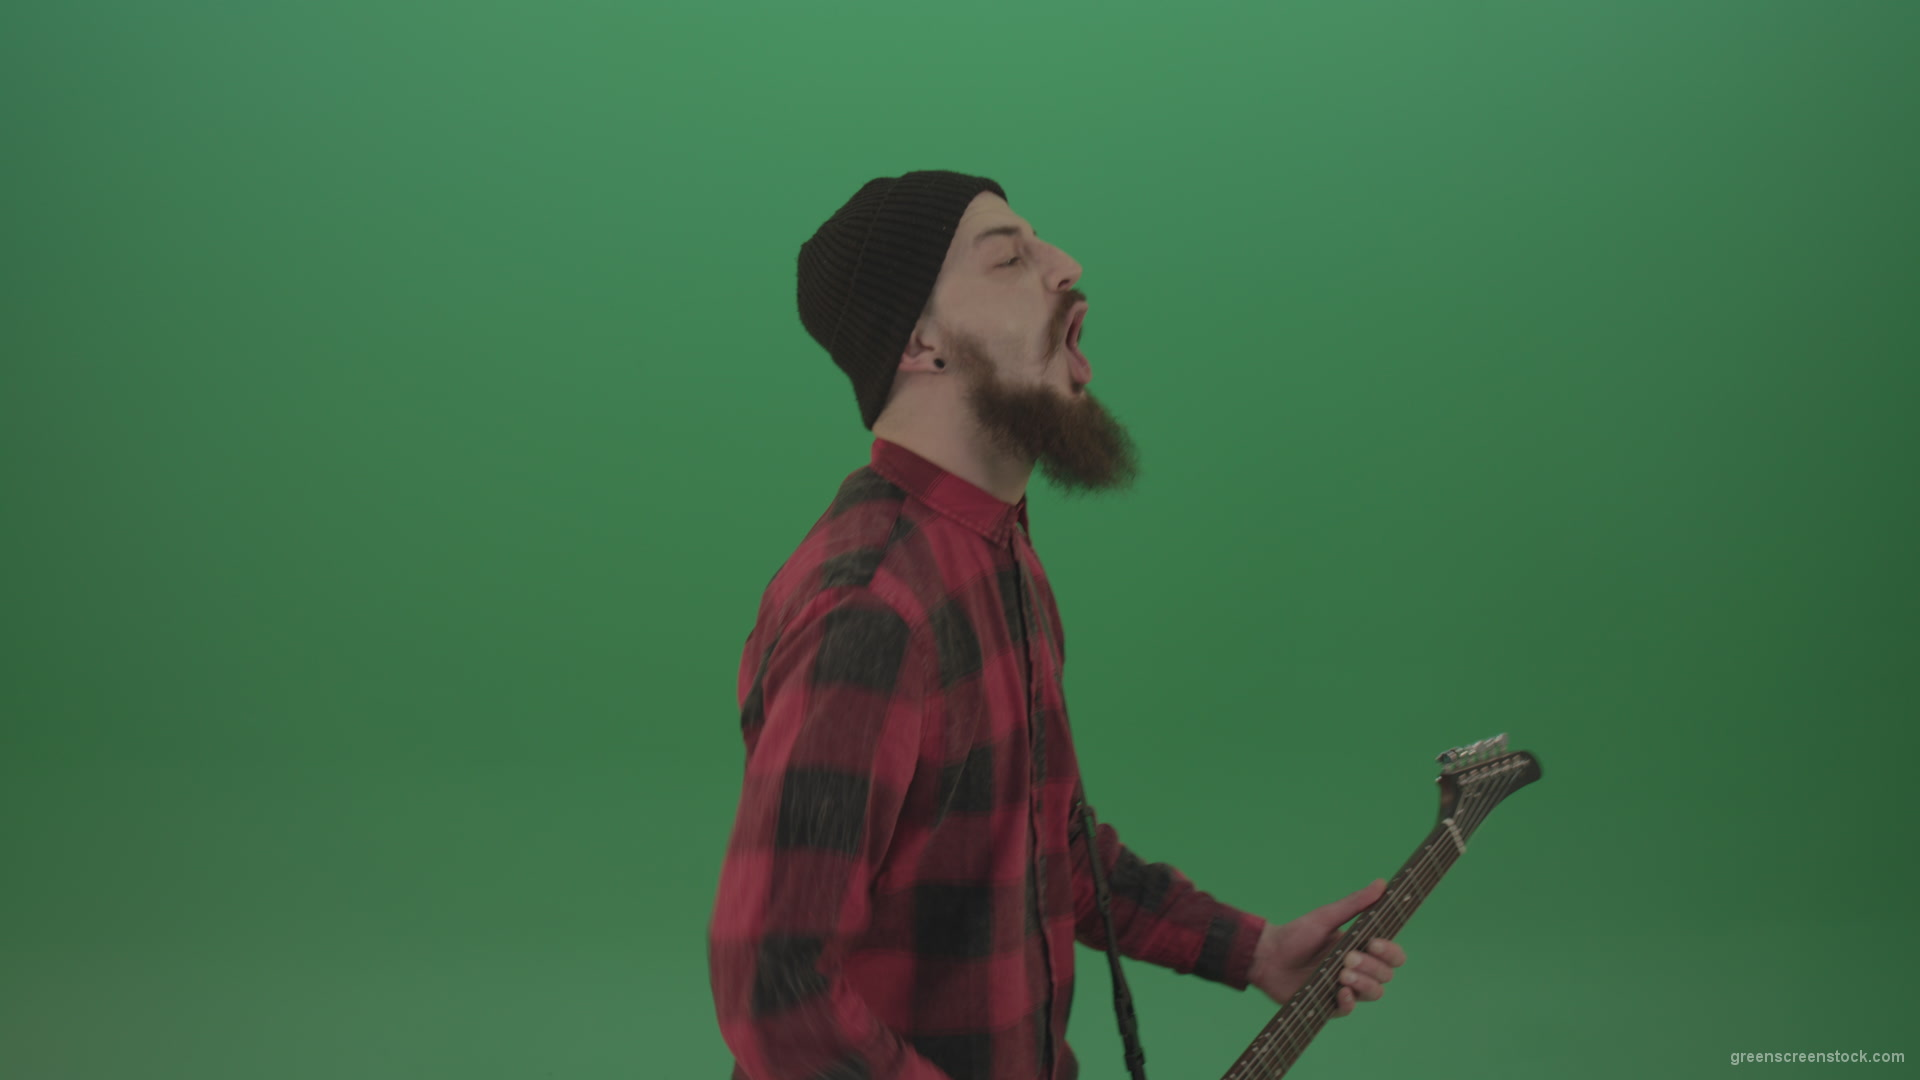 Angry-punk-rock-man-guitarist-play-guitar-and-scream-death-hardcore-music-isolated-on-green-screen_008 Green Screen Stock